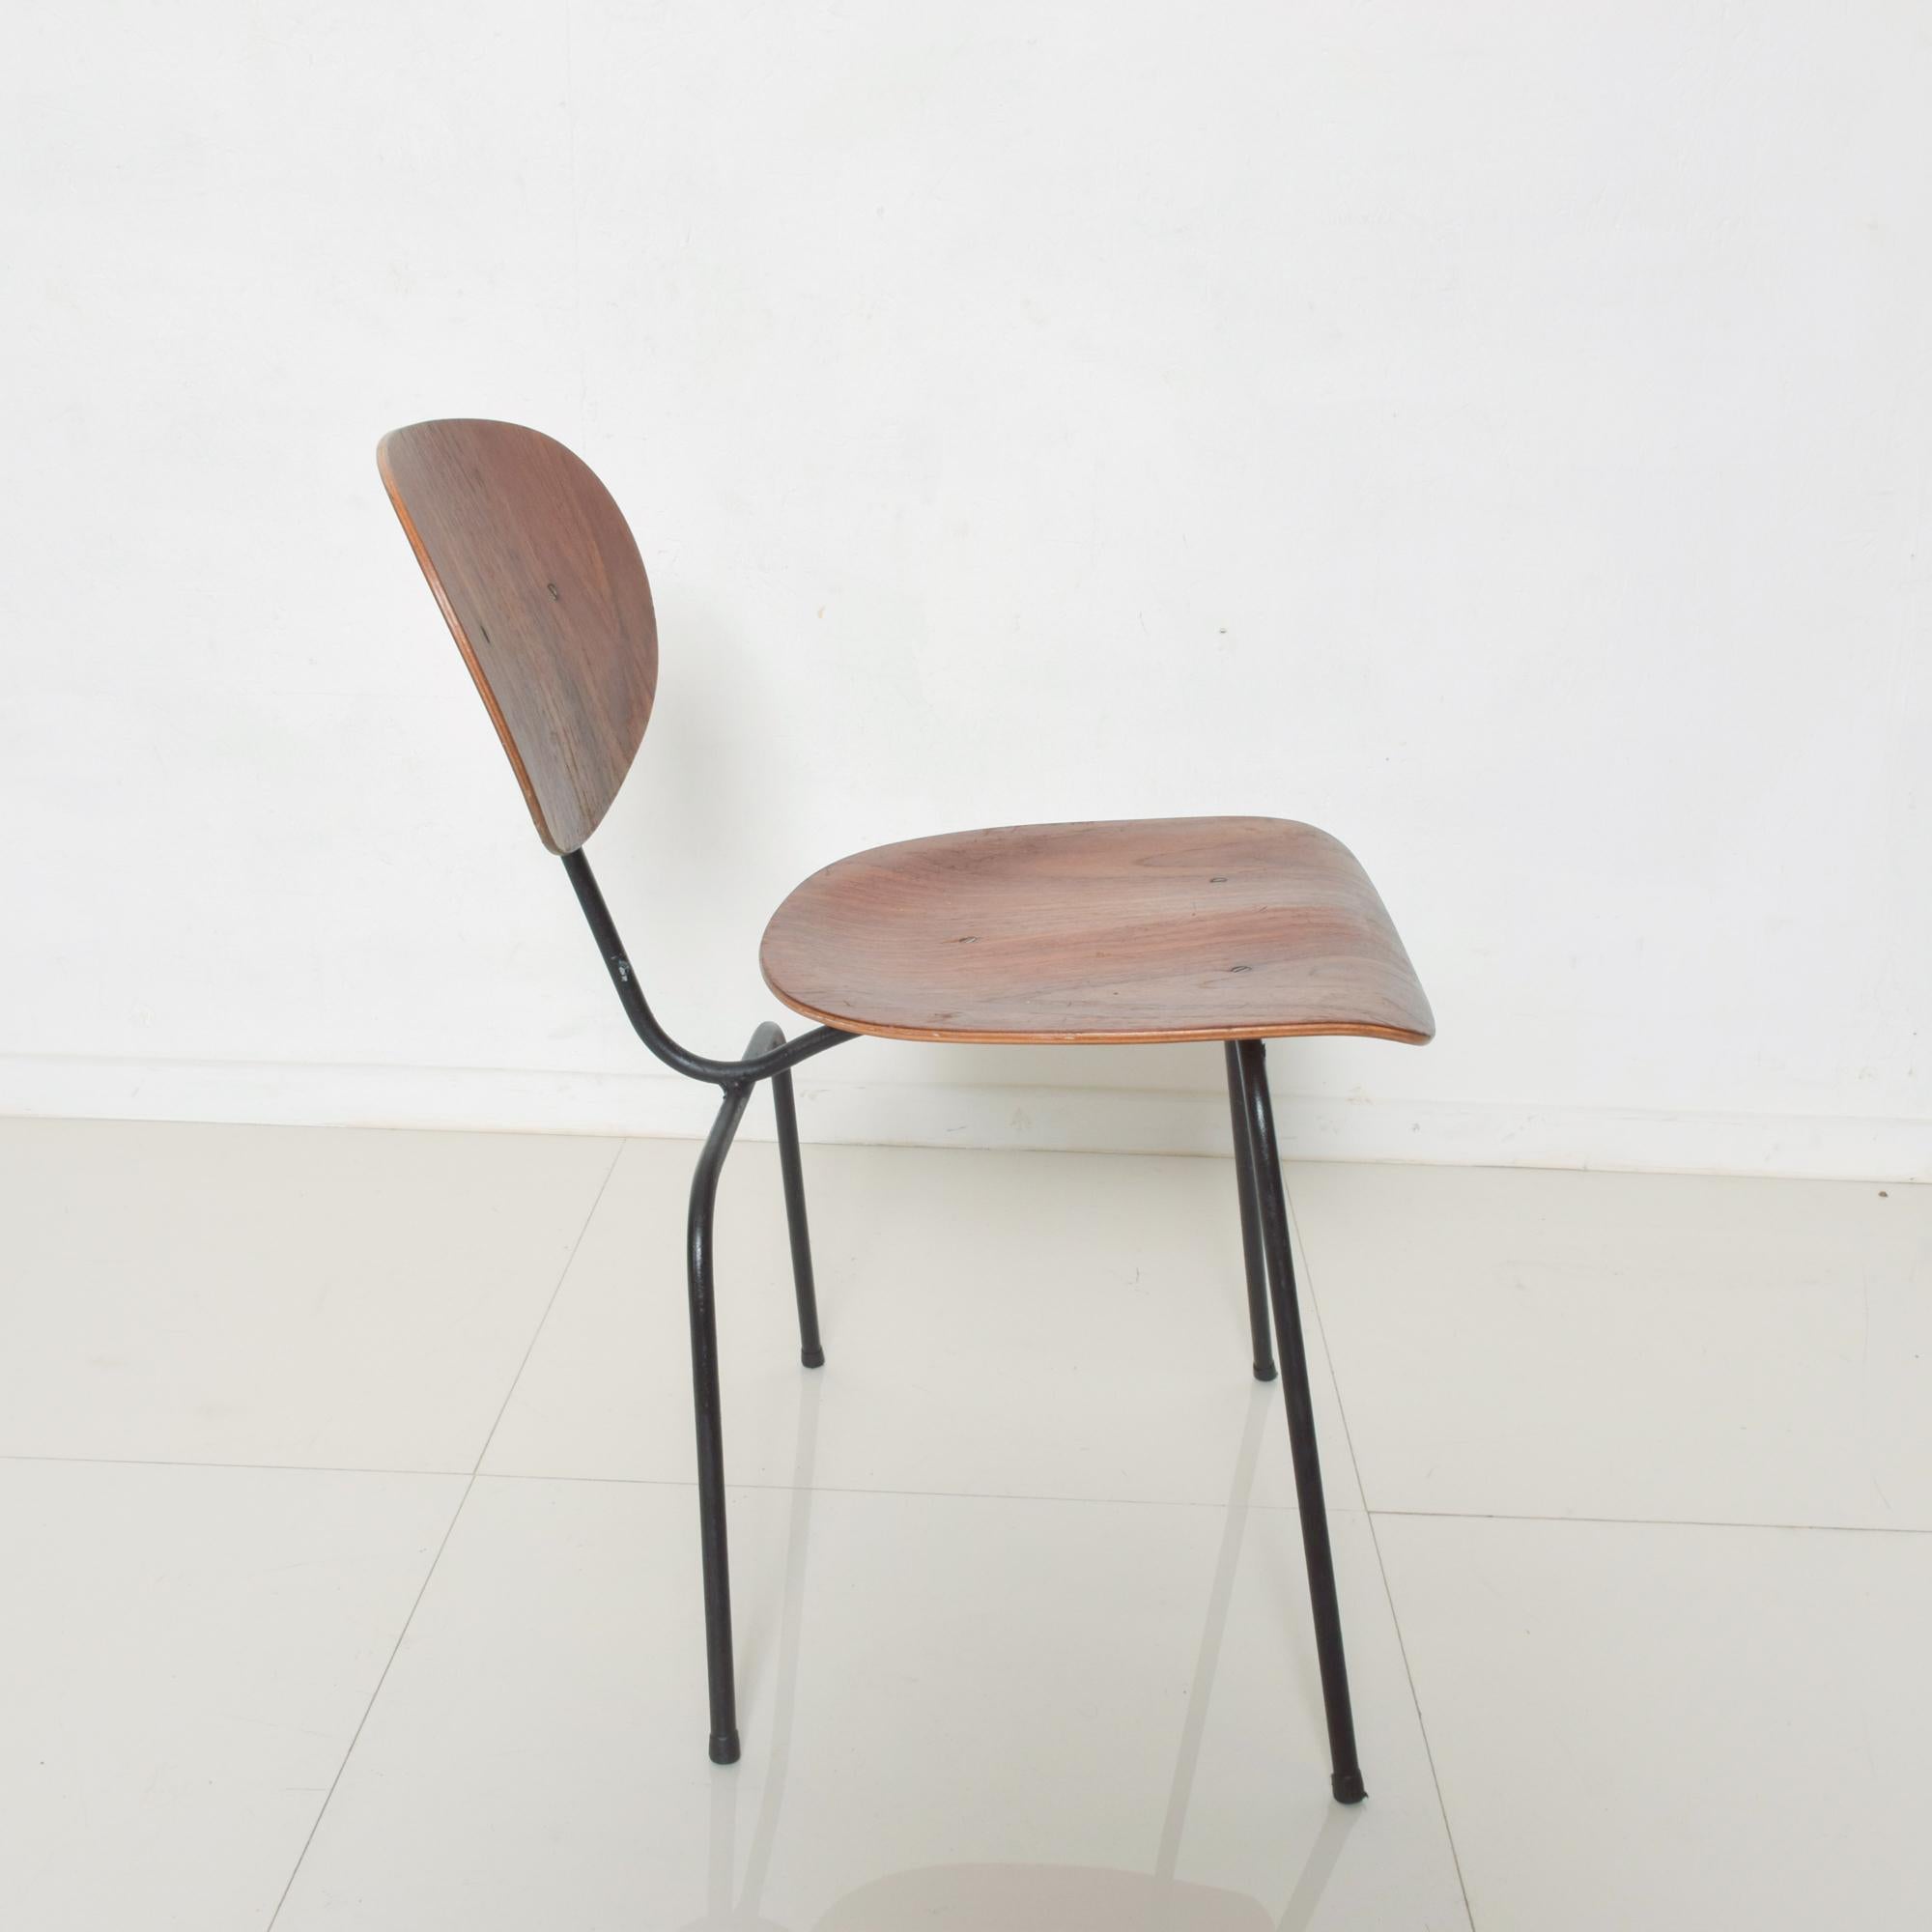 Mid-20th Century 1950s Bent Plywood Lounge Chair Metal Base After Eames For Sale